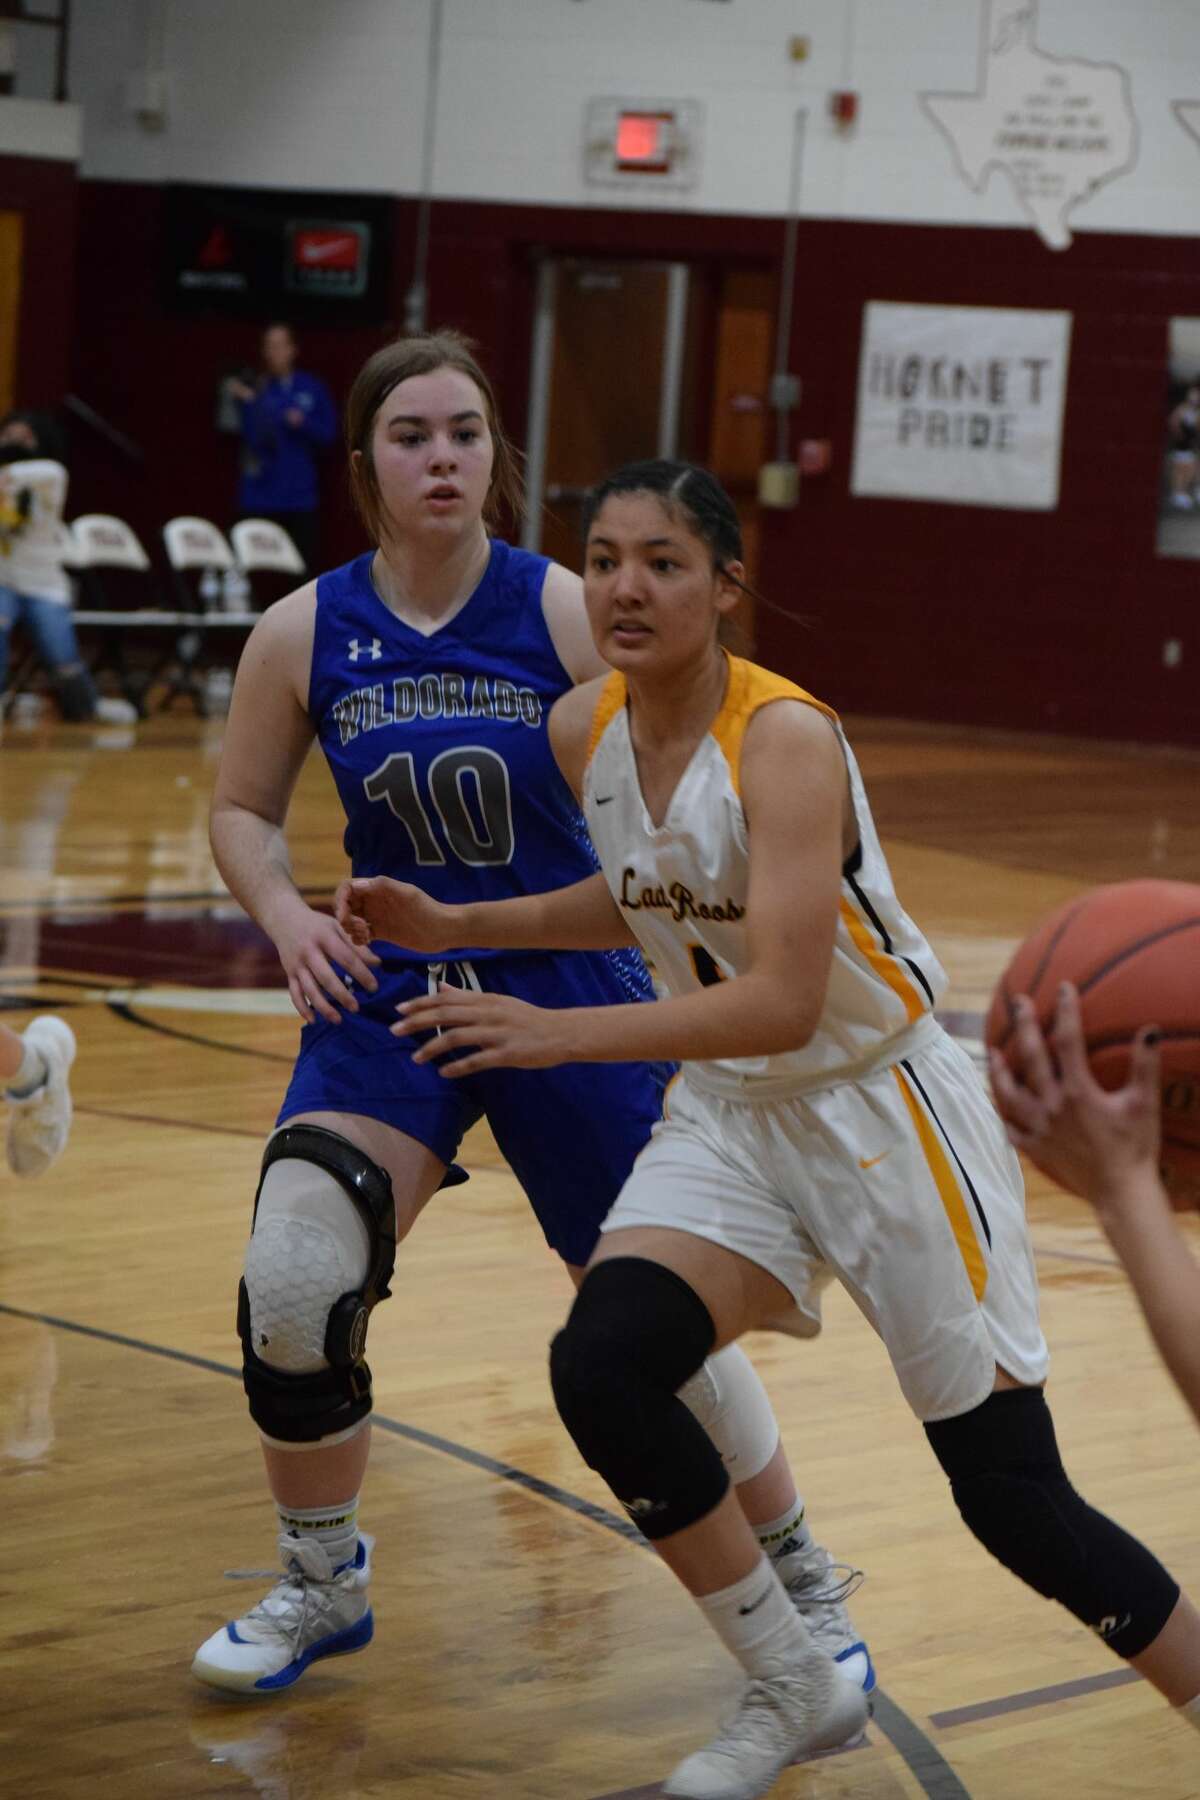 The Kress Lady Roos faced the Wildorado Lady Mustangs on Feb. 12 in a bi-district Class 1A game.